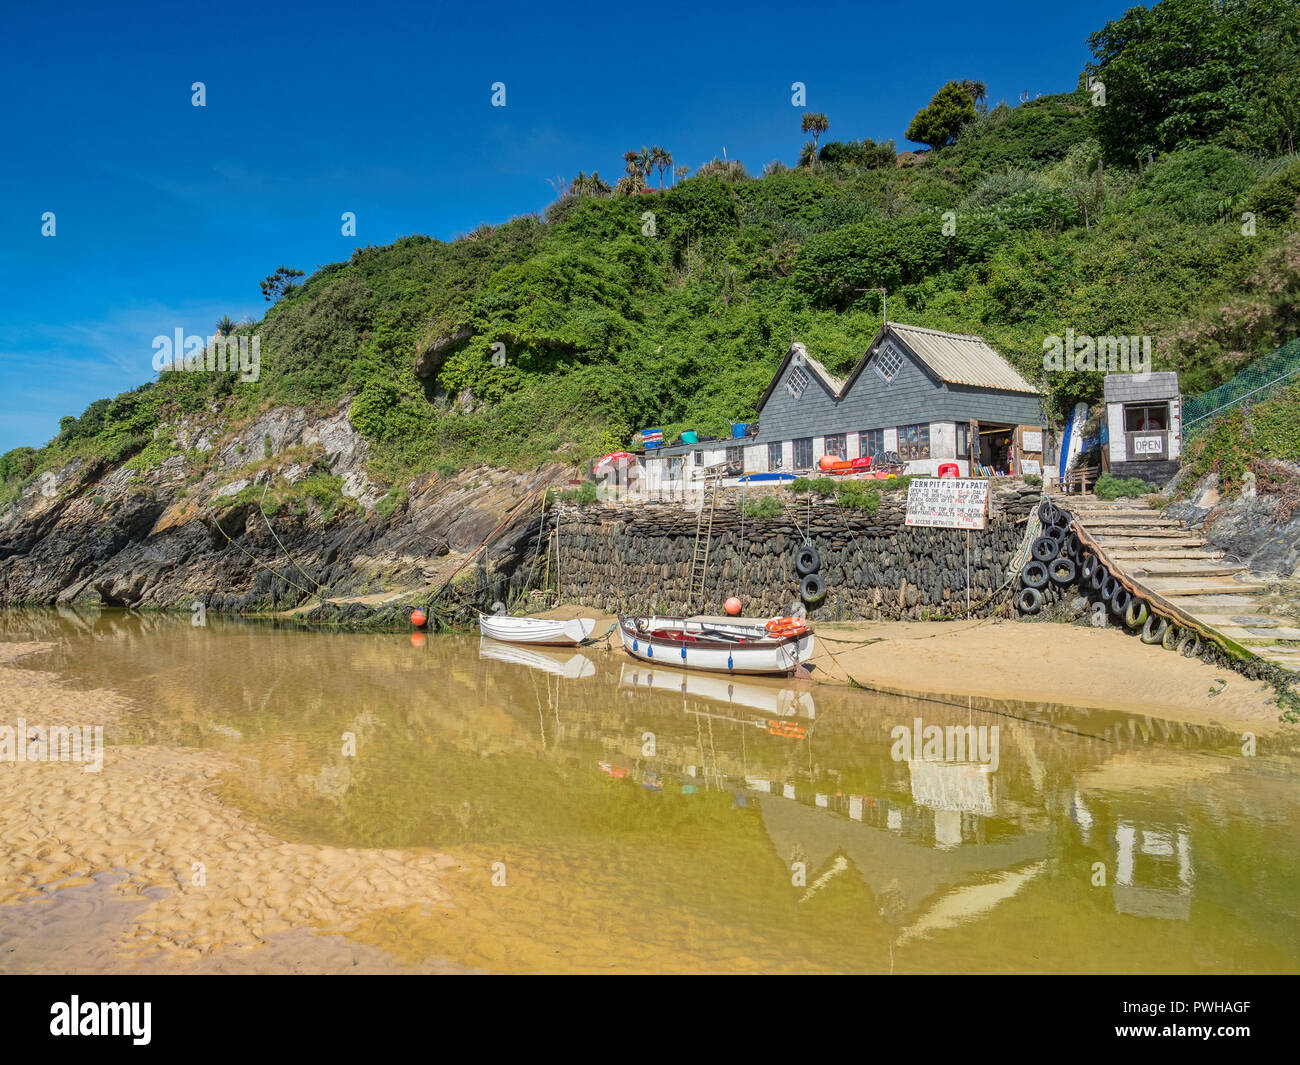 23 June 2018: Newquay, North Cornwall, UK - Crantock Beach with the Fern Pit Ferry. Stock Photo